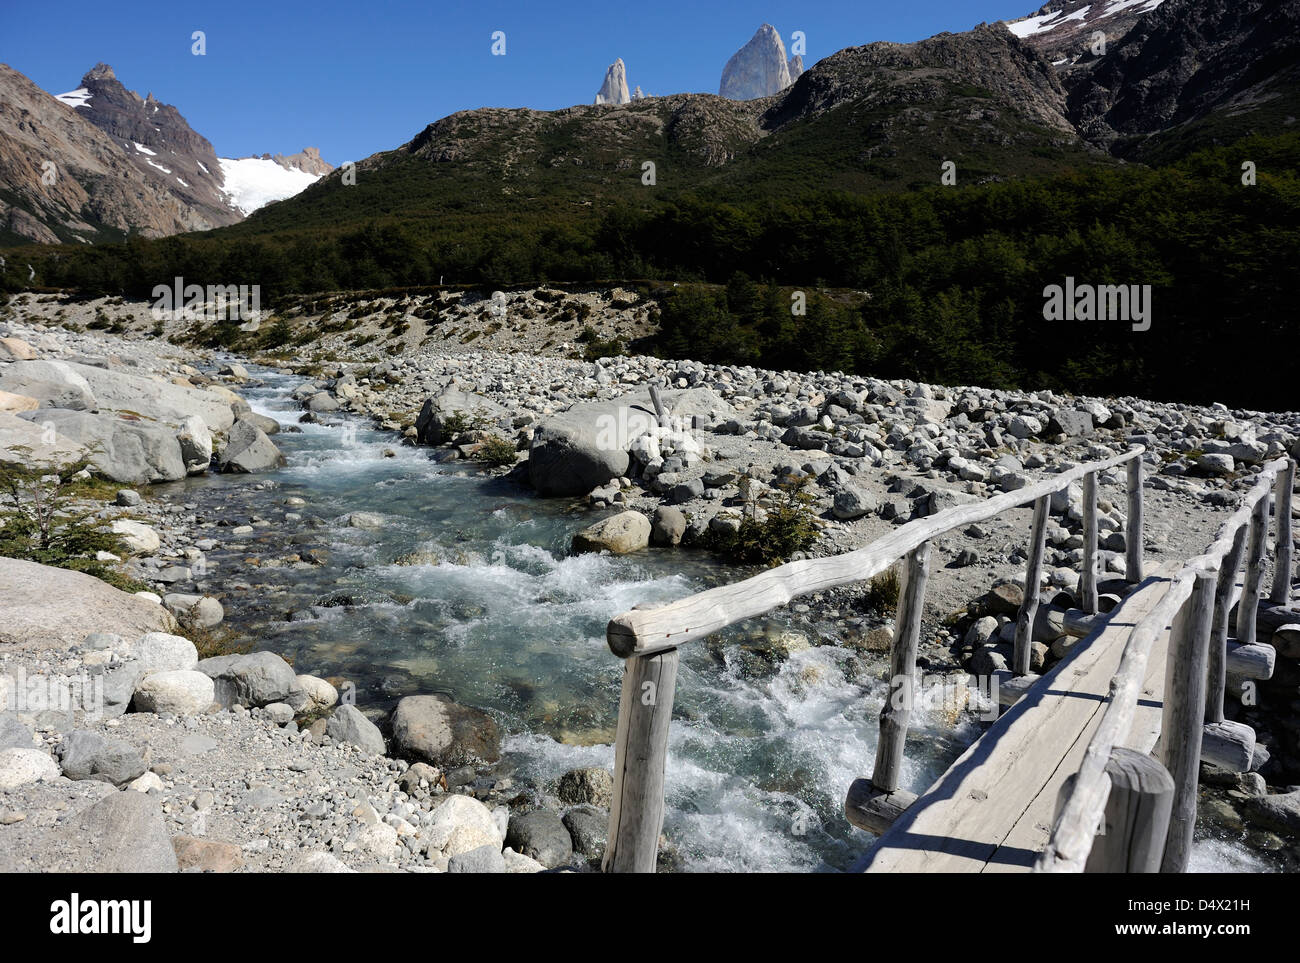 Bridge over a stream in Los Glaciares National Park at the foot of the Fitzroy Range near El Chalten. Argentina. Stock Photo